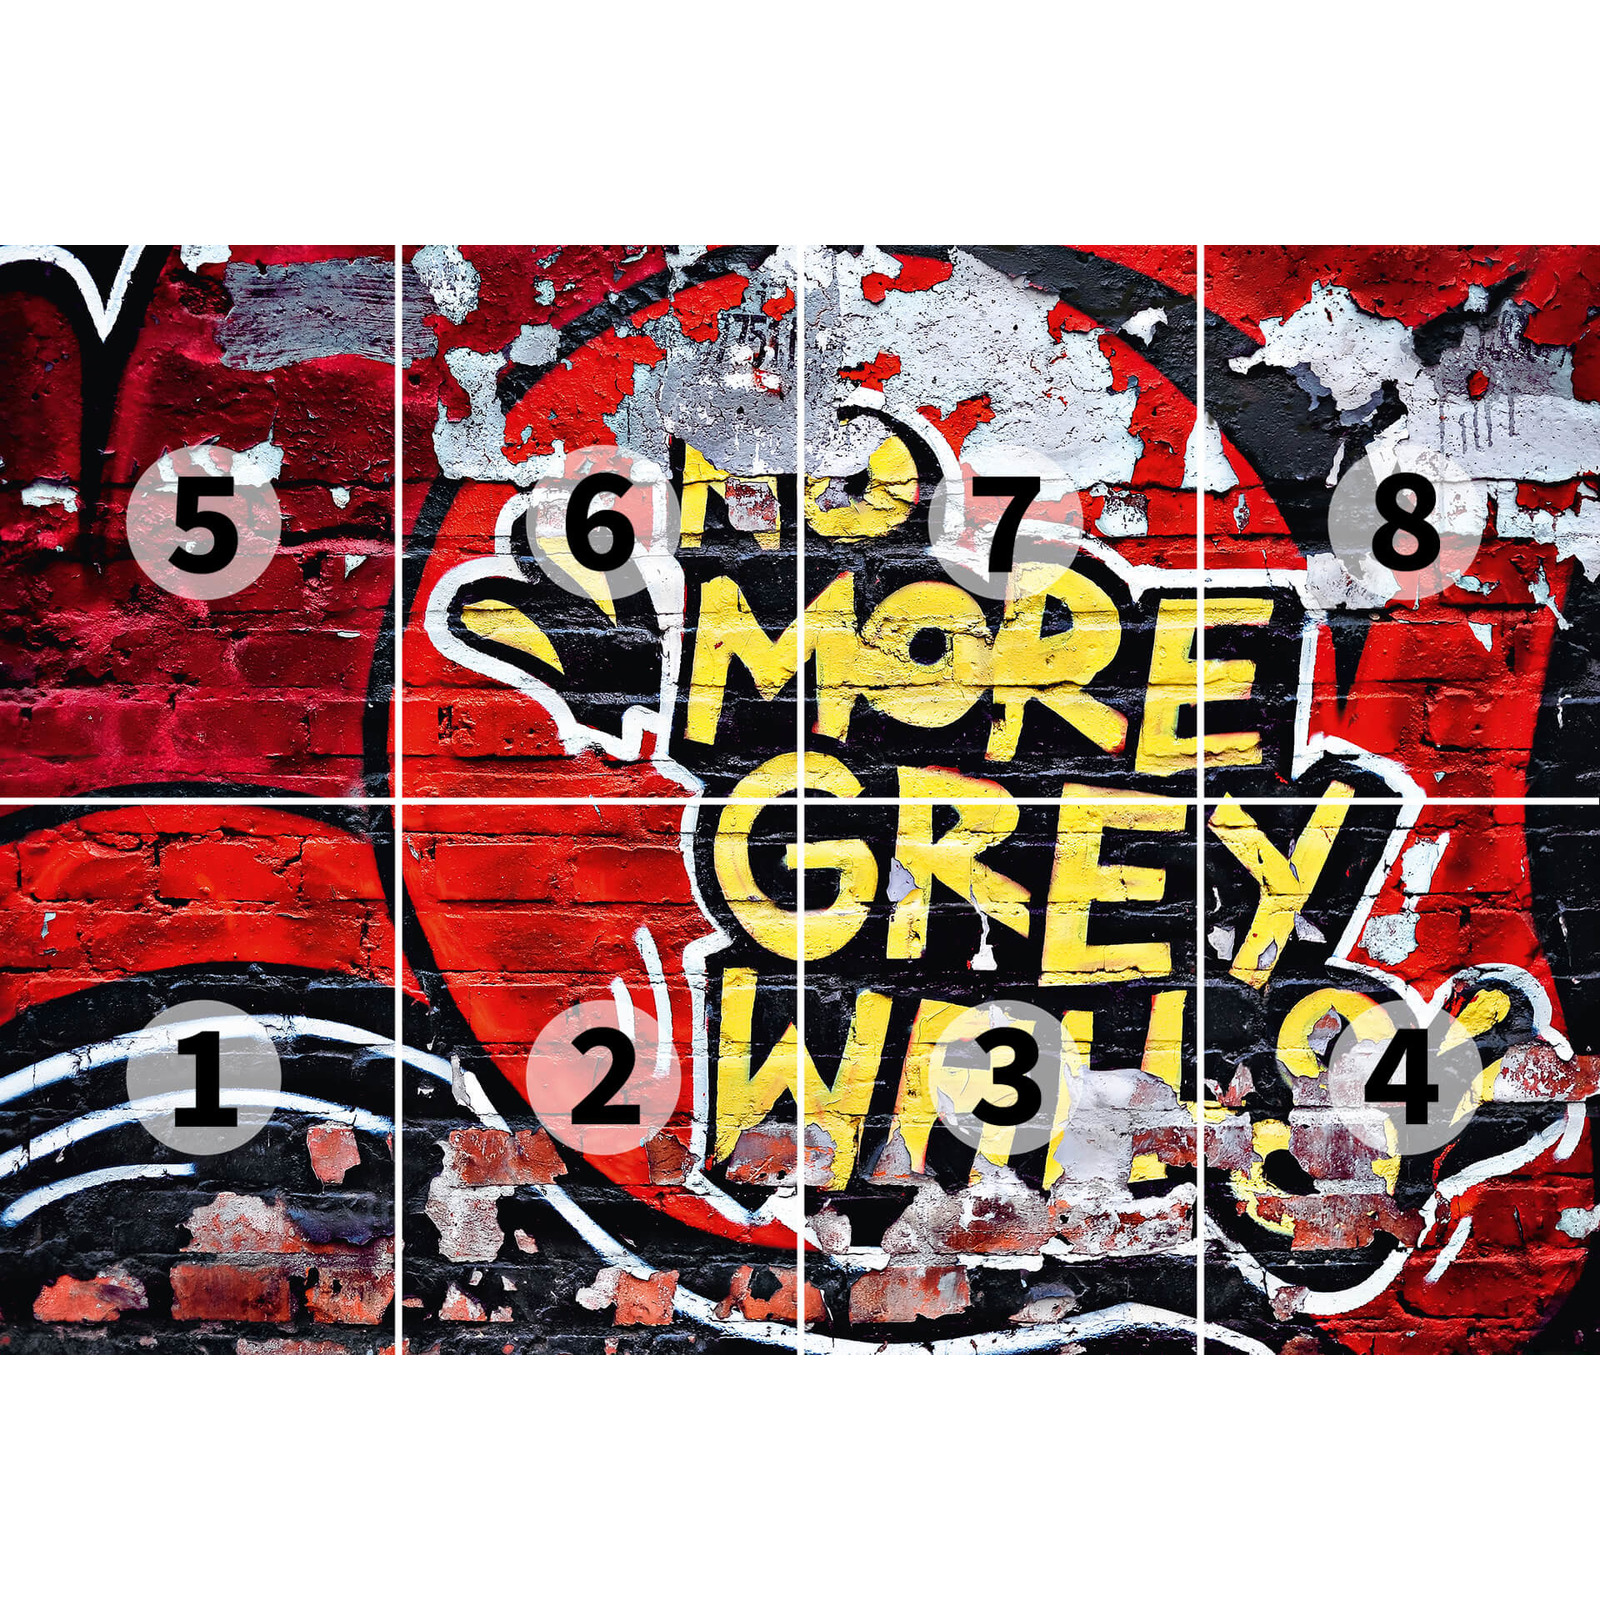             Stone look mural with colourful graffiti - red
        